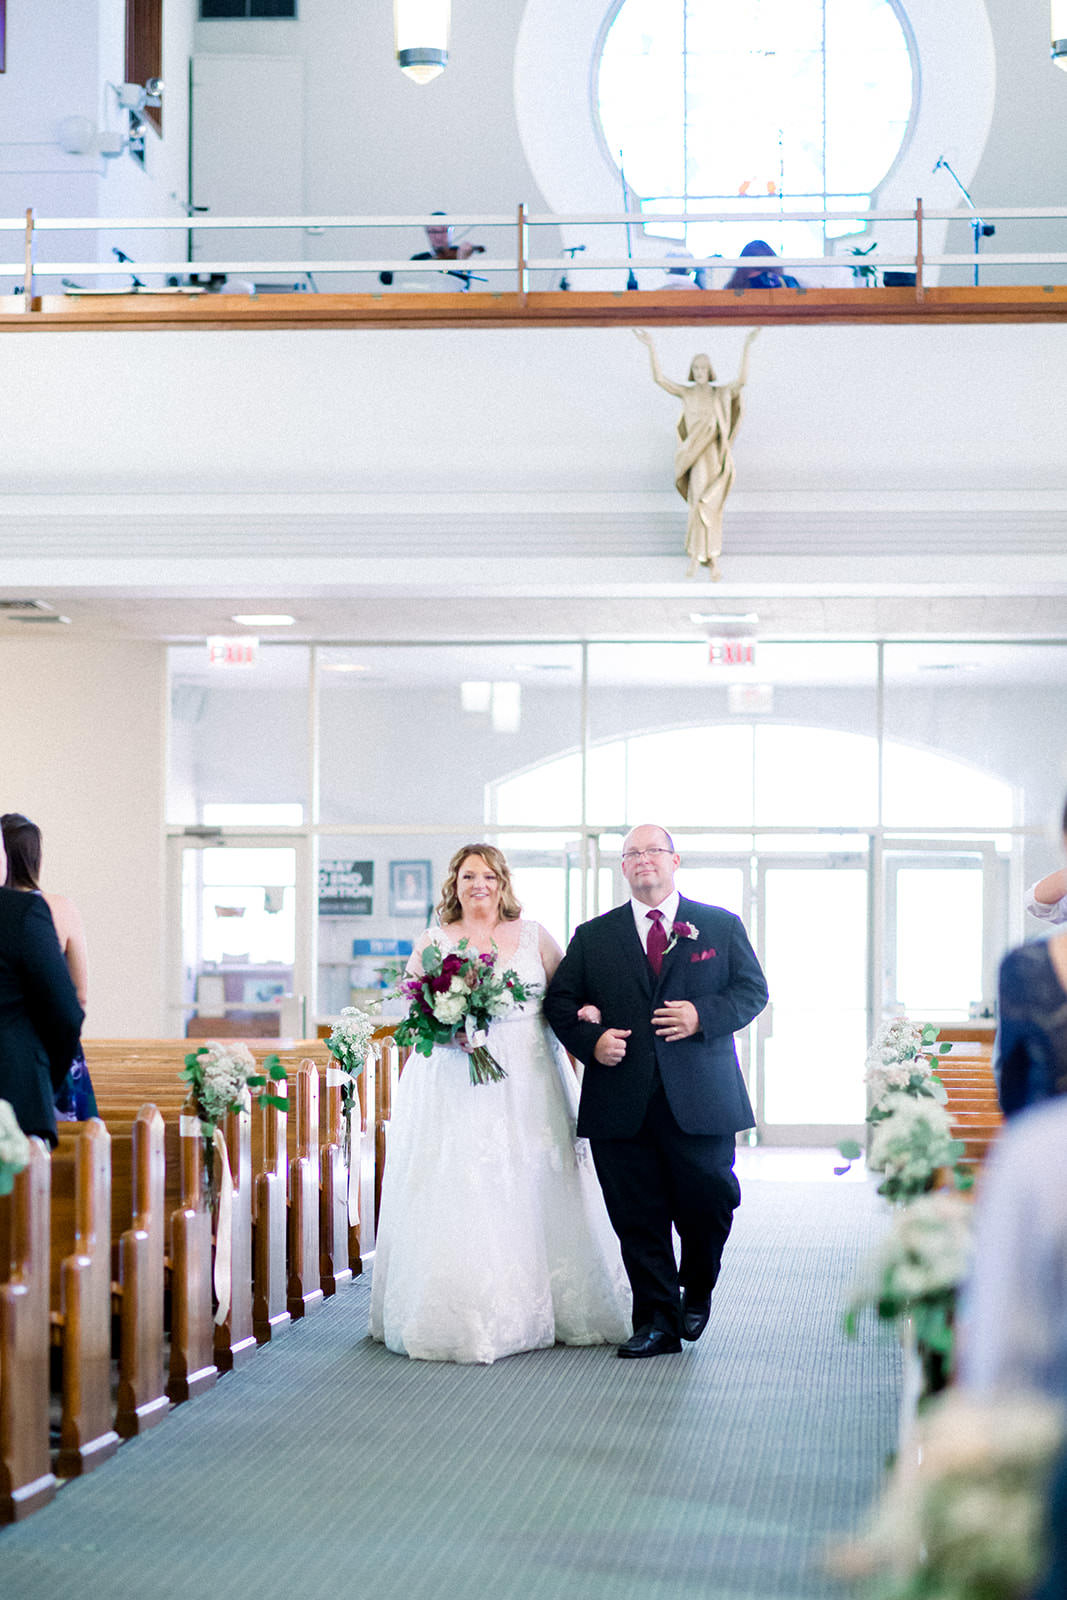 Traditional Bride Walking with Father Down the Wedding Ceremony Aisle | Tampa Bay Wedding Photographer Shauna and Jordon Photography | St. Pete Wedding Venue St. John Vianney Catholic Church